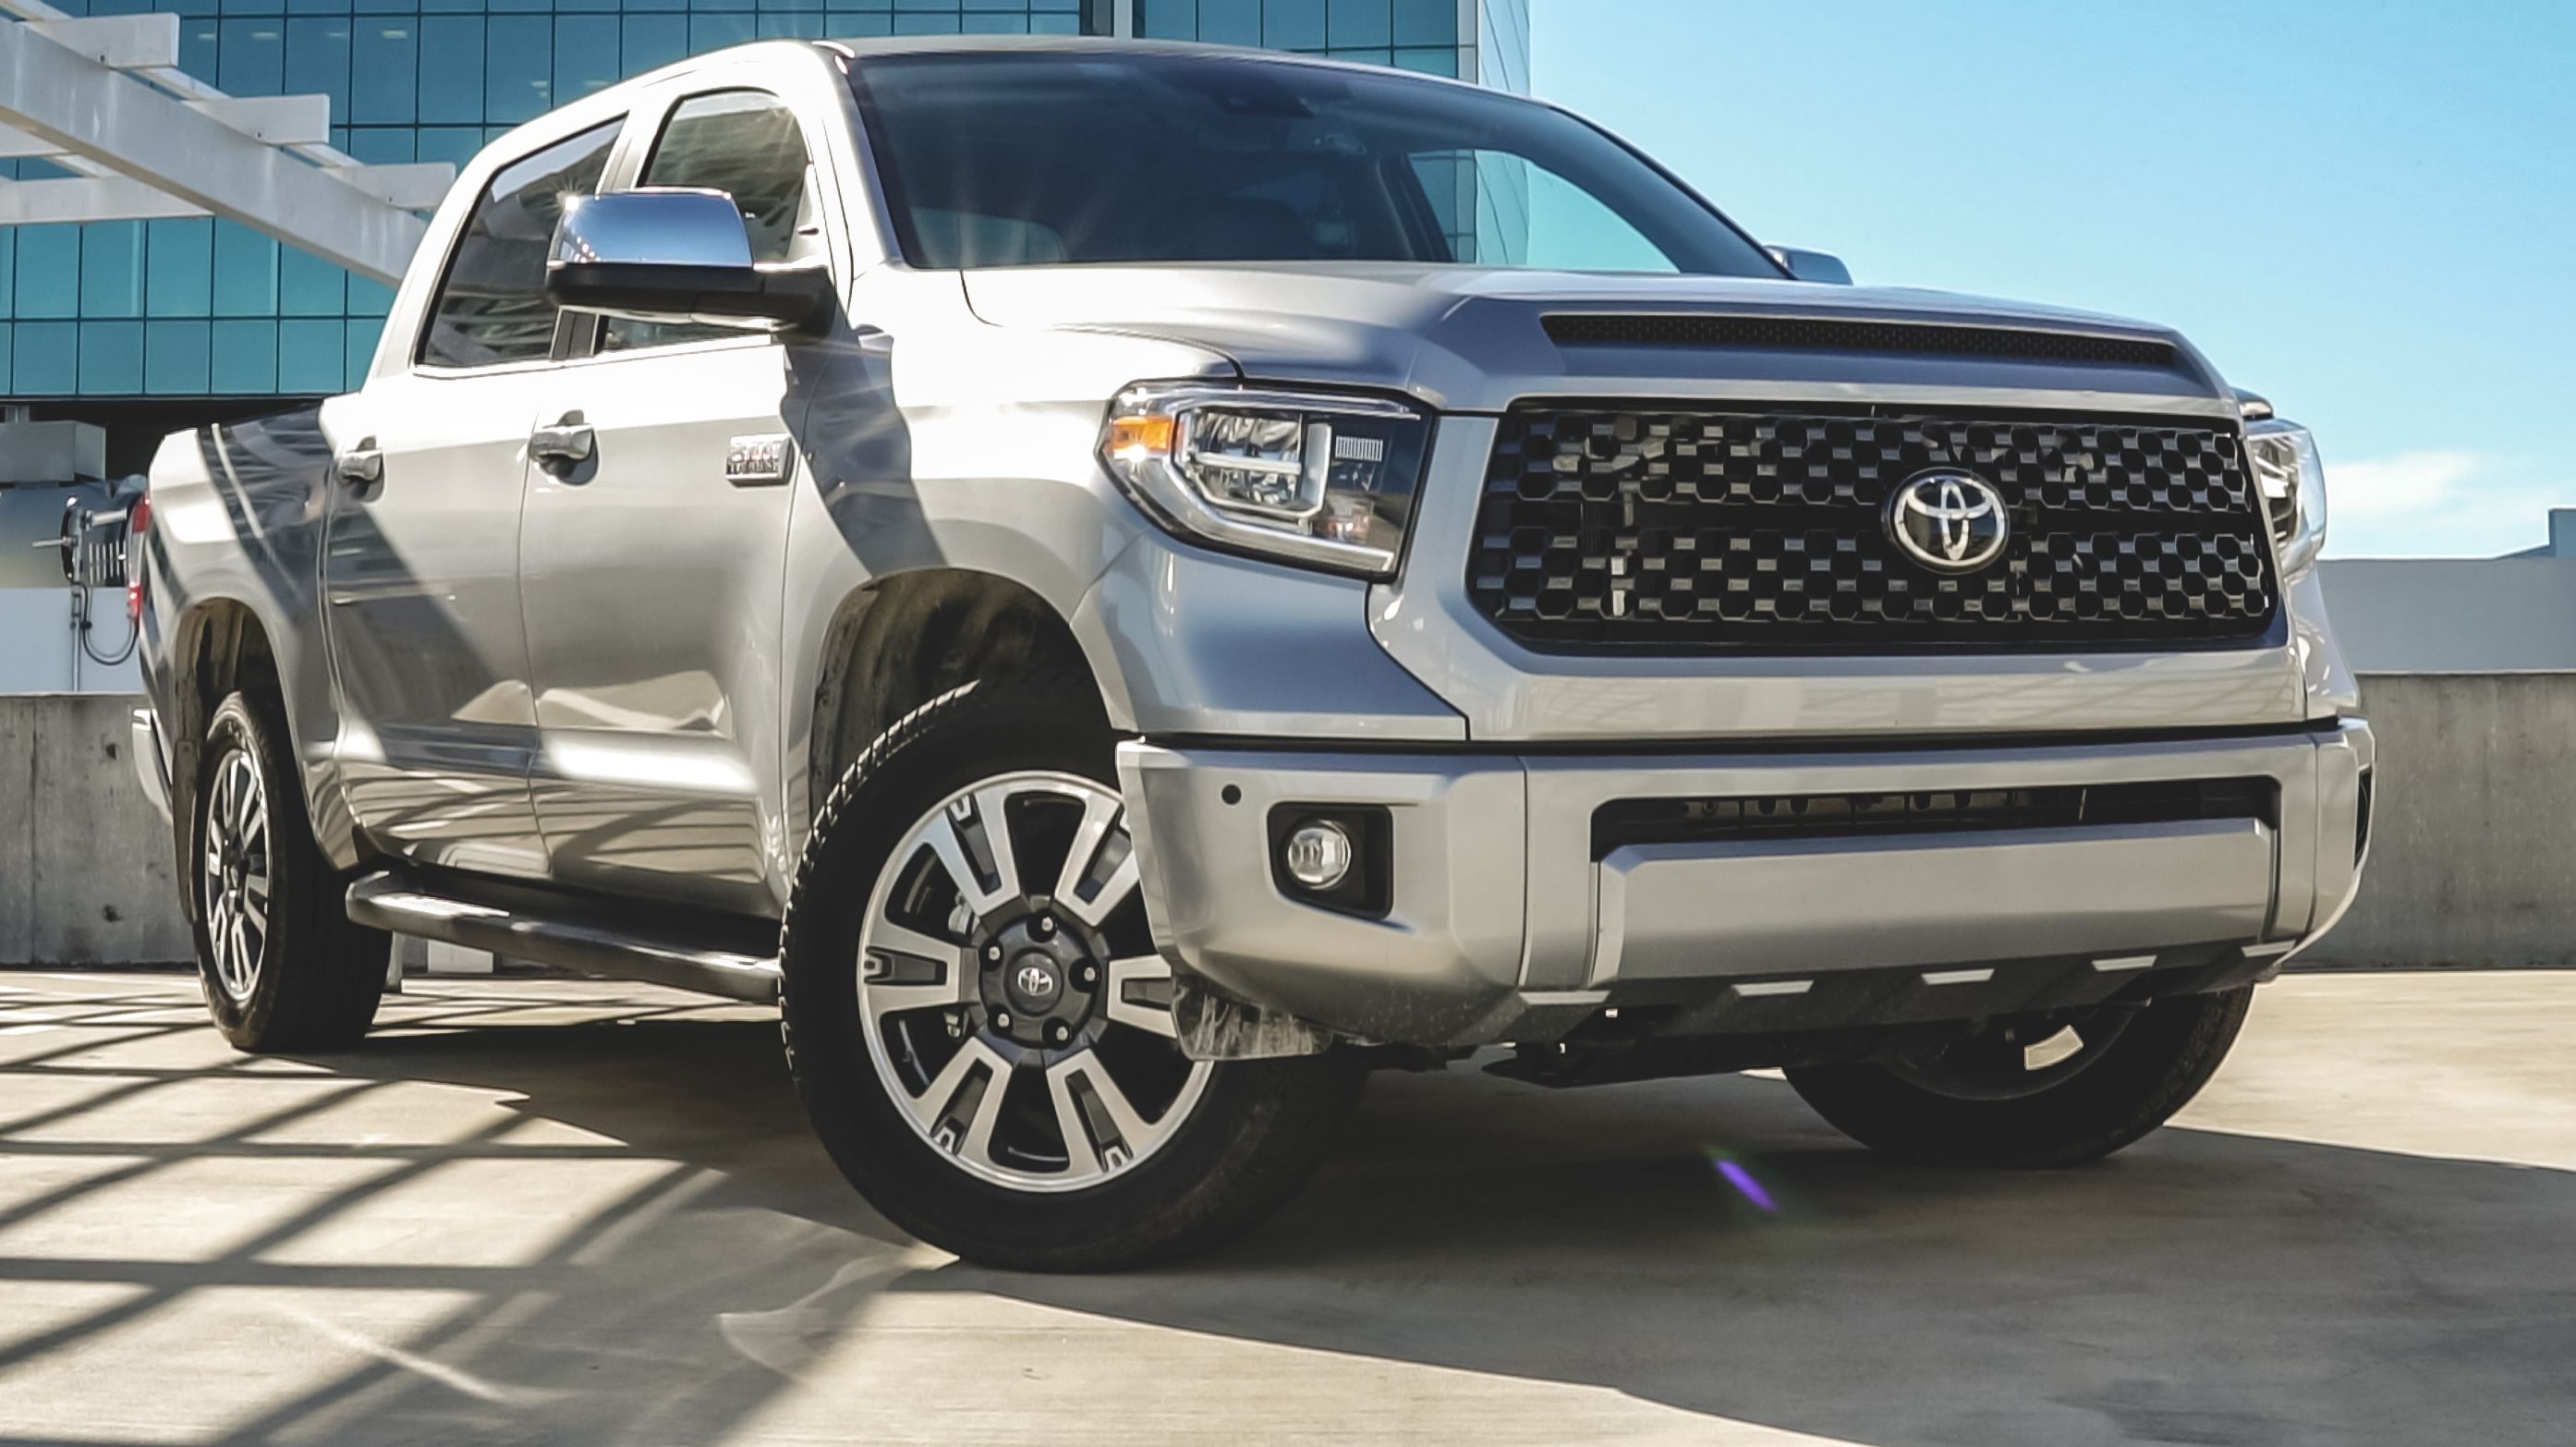 2021 Toyota Tundra Platinum Review: Rugged Reliability With Quilted Leather